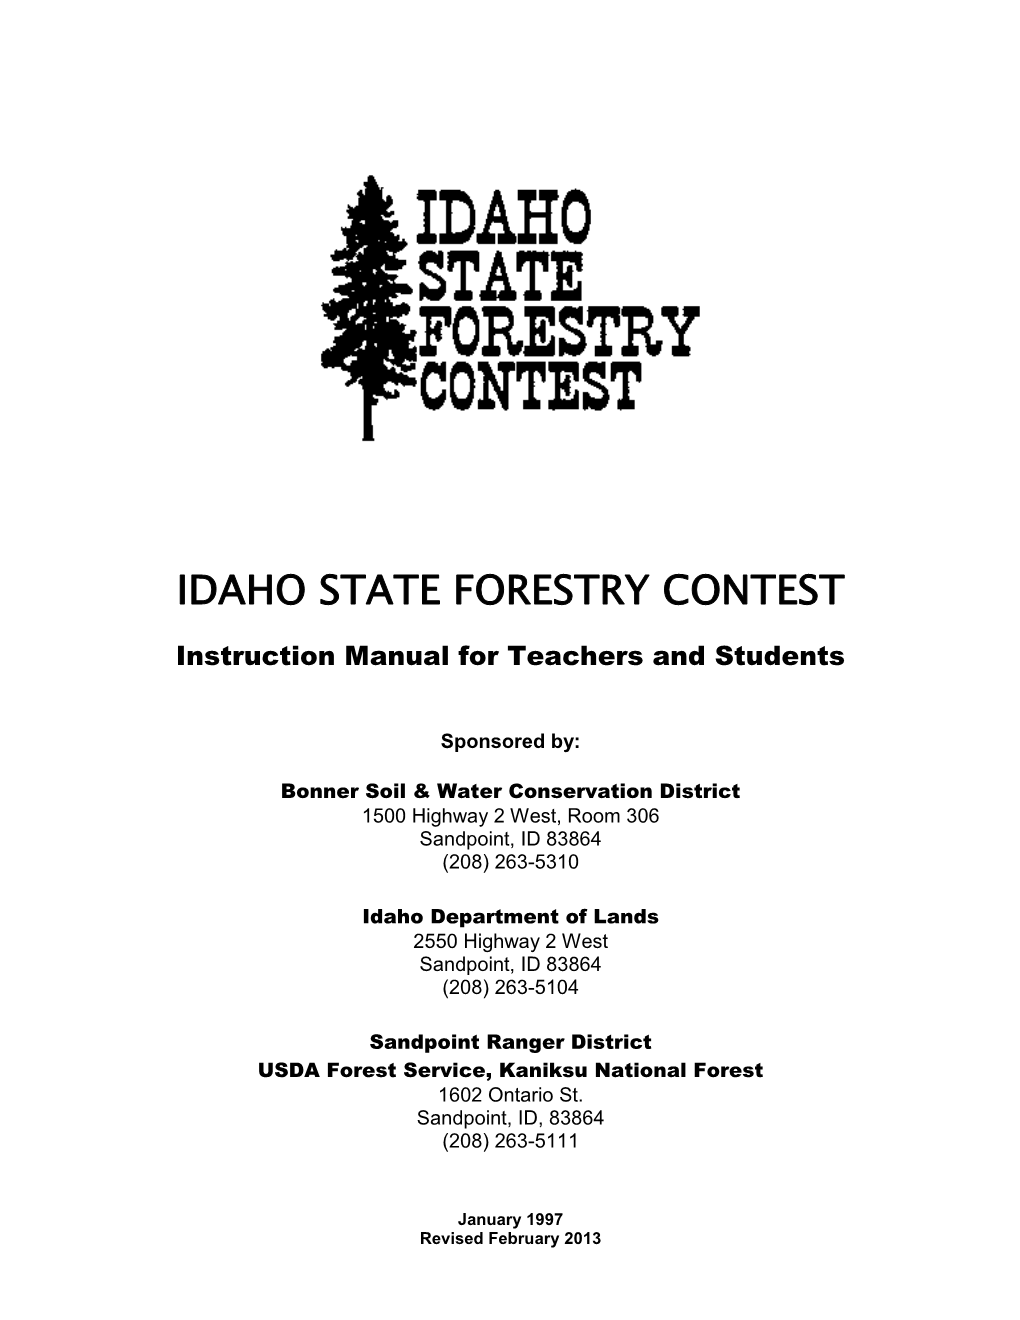 Idaho State Forestry Contest